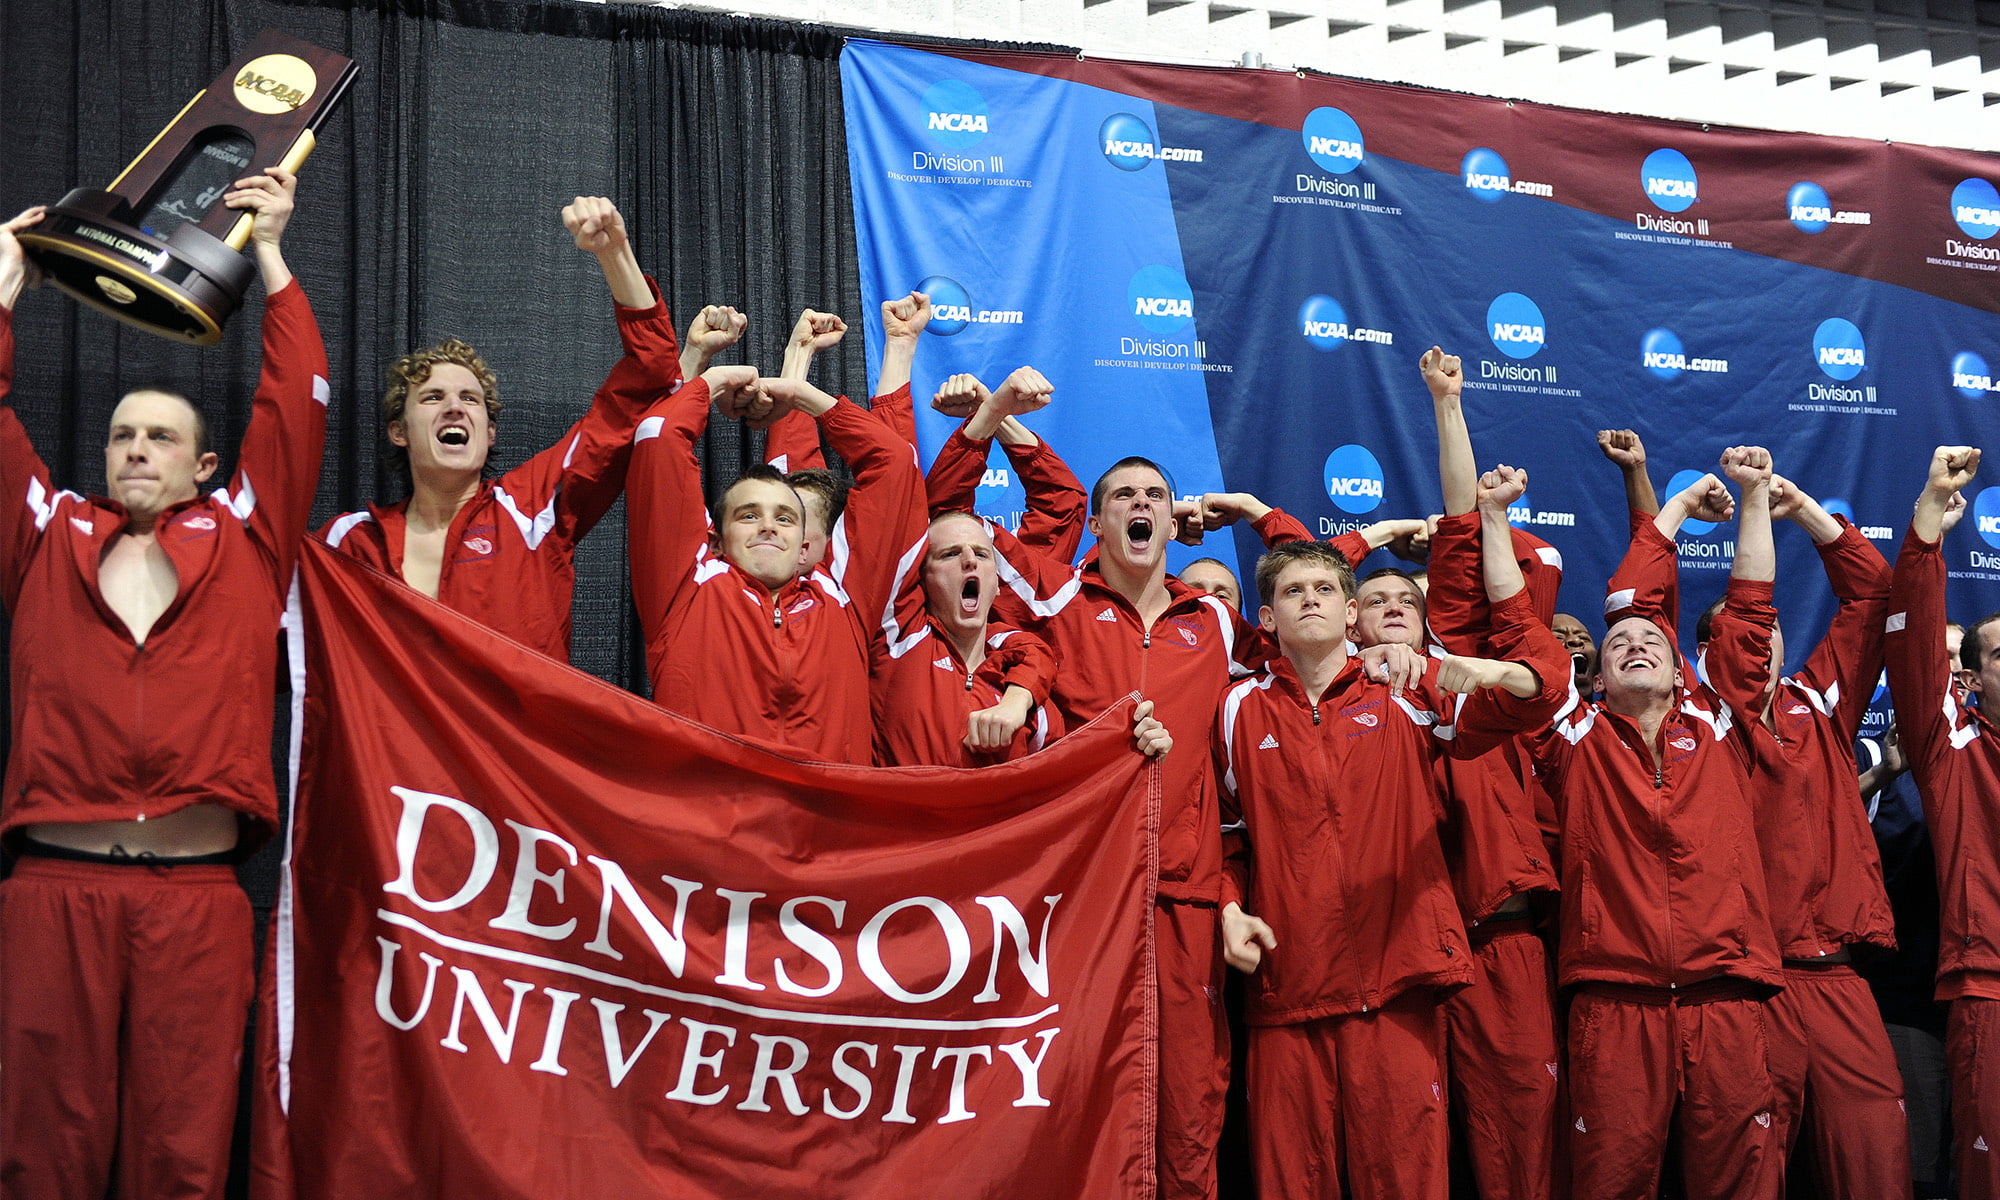 The Denison men’s swim team celebrates its first NCAA championship in Knoxville, Tennessee